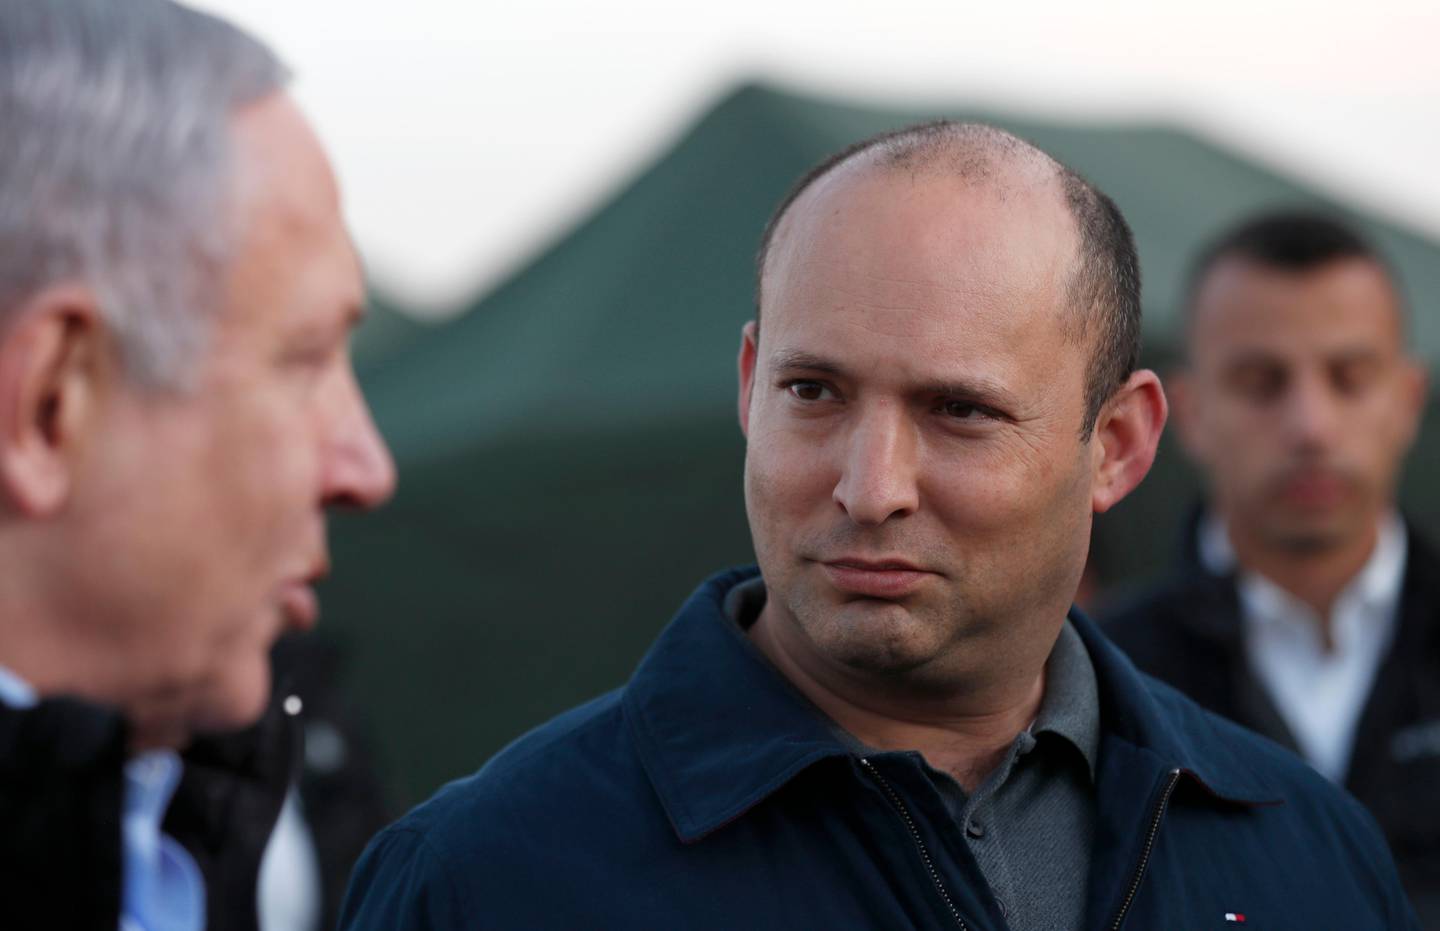 FILE - In this Sunday, Nov. 24, 2019 file photo, Israeli Prime Minister Benjamin Netanyahu, left, and Defense Minister Naftali Bennett, visit an Israeli army base in the Golan Heights, on the Israeli-Syrian border. Bennett is ordering plans for new settler housing in the volatile West Bank city of Hebron. In a letter sent by his office to defense officials Sunday, Dec. 1, 2019, Israels new pro-settler defense minister called for planning processes to be advanced for new Jewish settler housing. (Atef Safadi/Pool via AP, File)